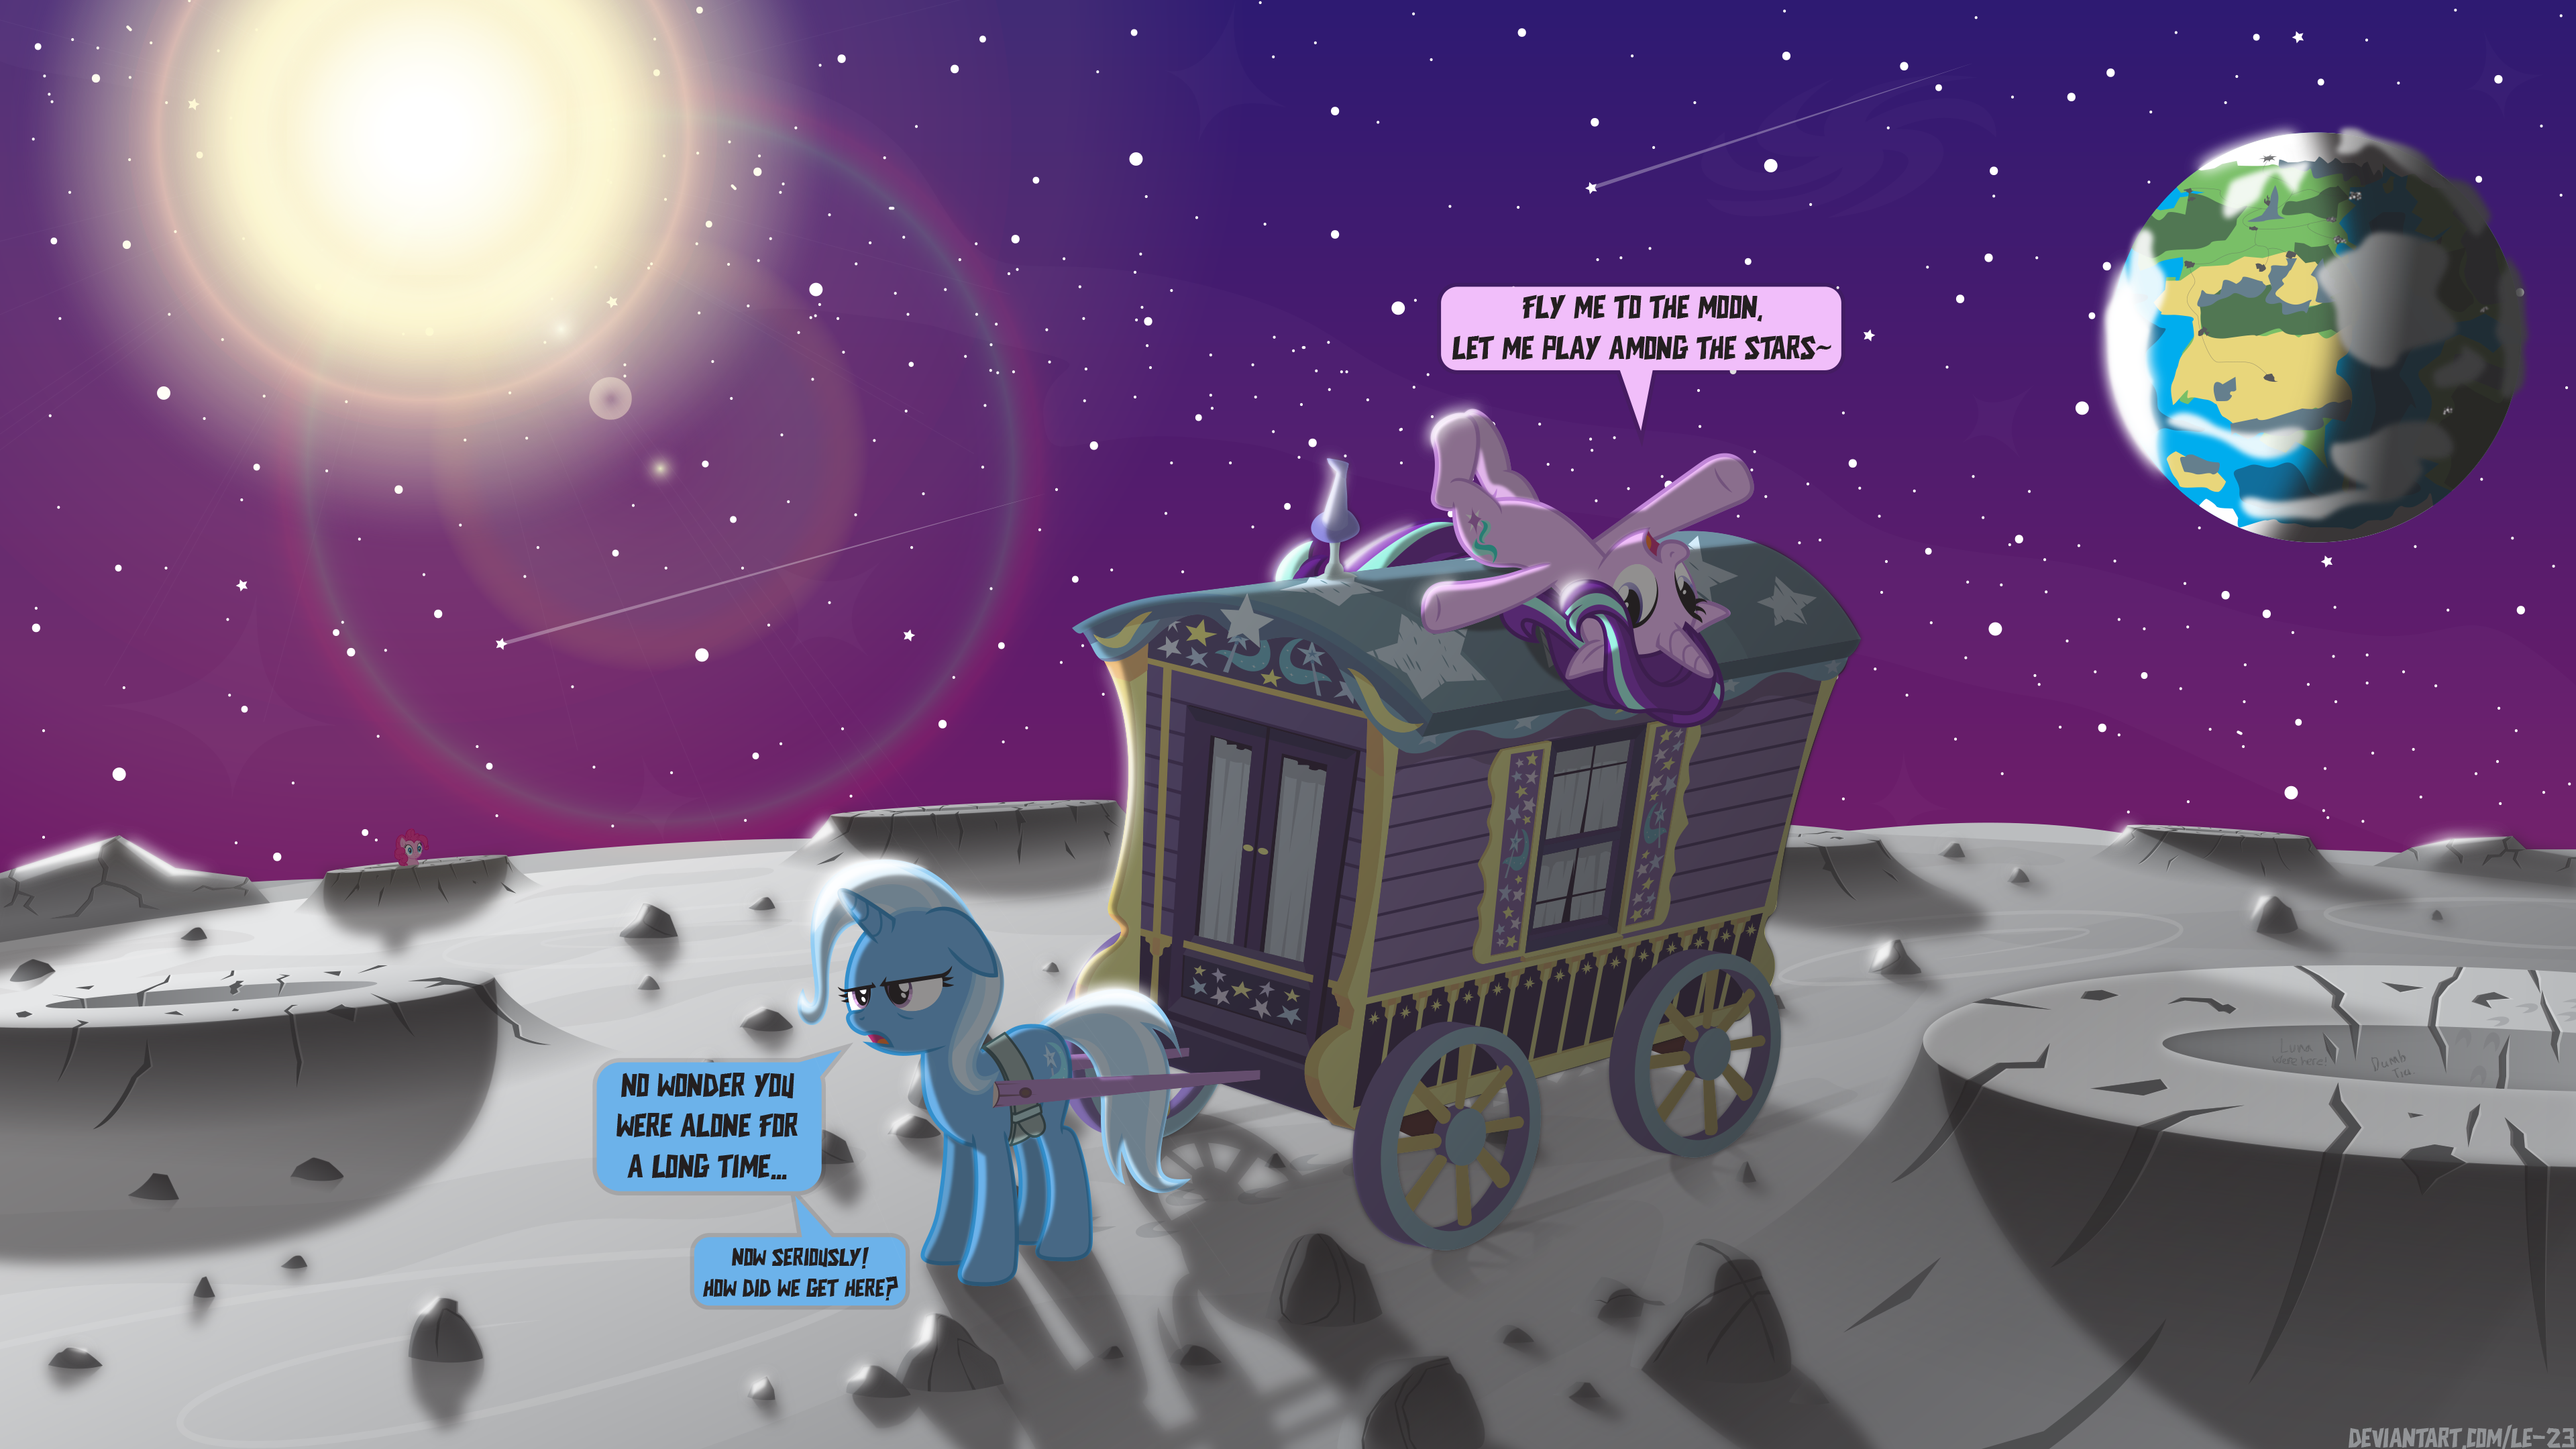 2578612__safe_artist-colon-le-dash-23_pinkie+pie_starlight+glimmer_trixie_pony_unicorn_complex+background_crater_earth_female_fly+me+to+the+moon_frank+sinatra_h.png